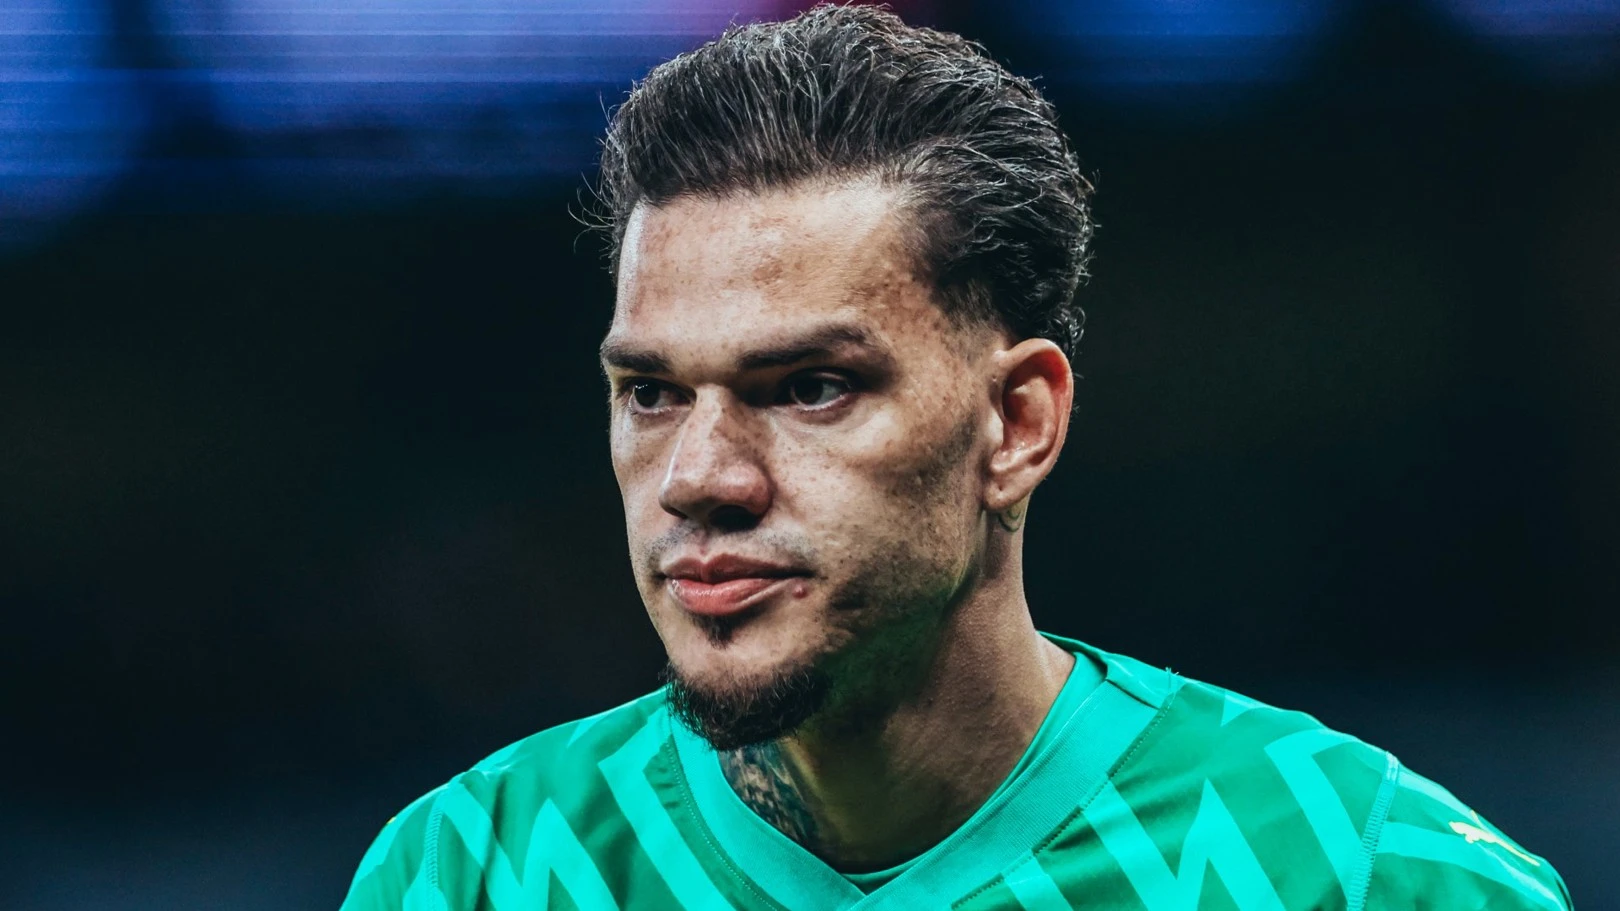 Ederson out for the rest of the season with fractured eye socket